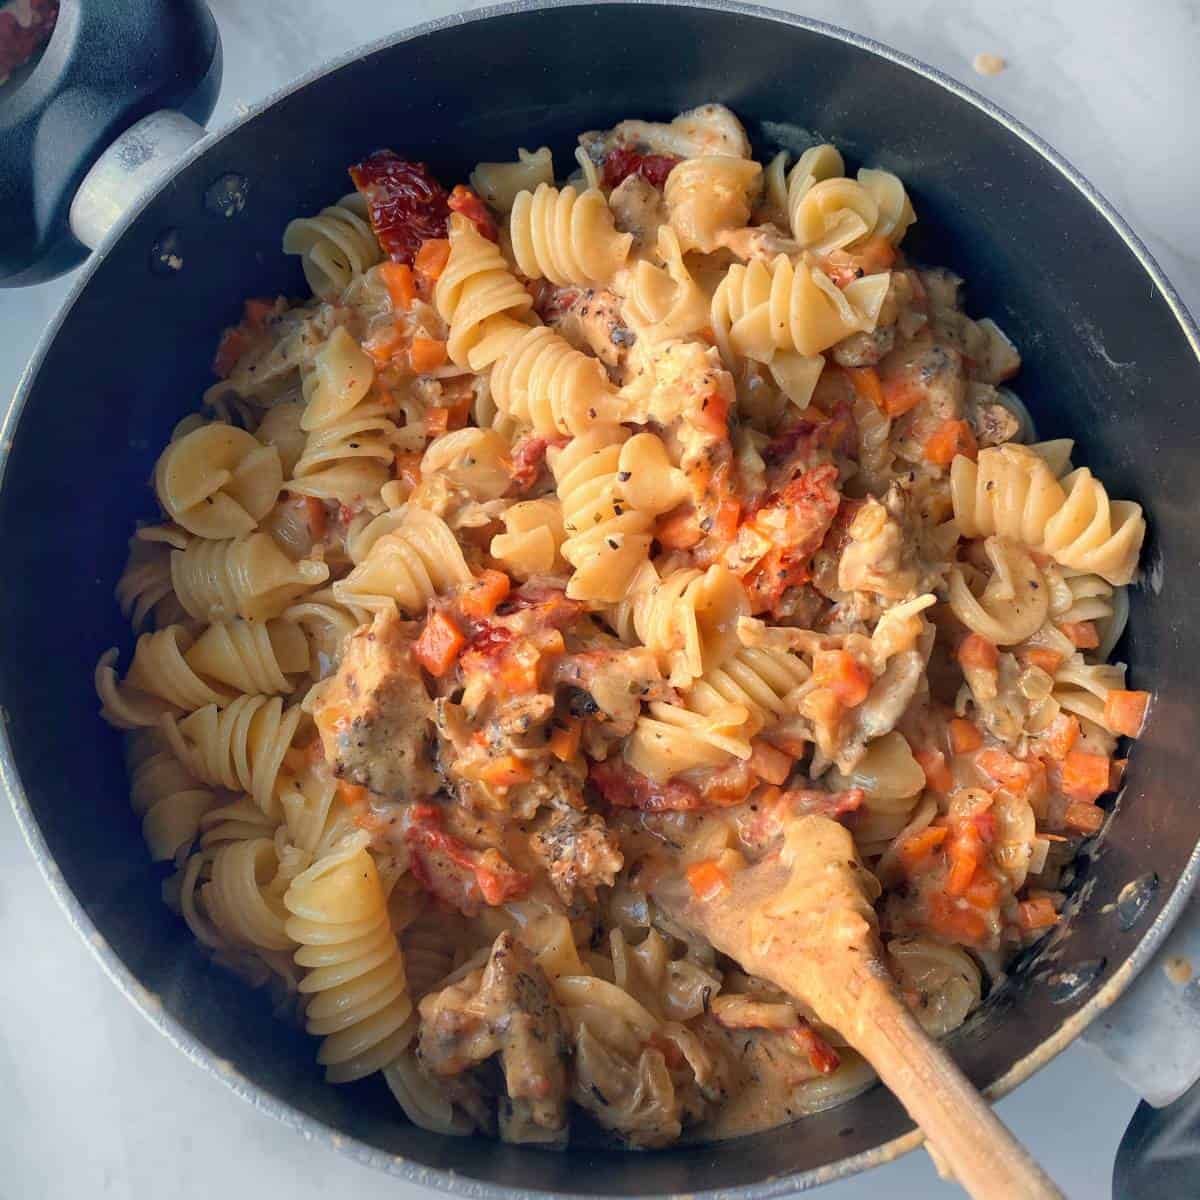 Cooked cheesy chicken pasta in a fry pan